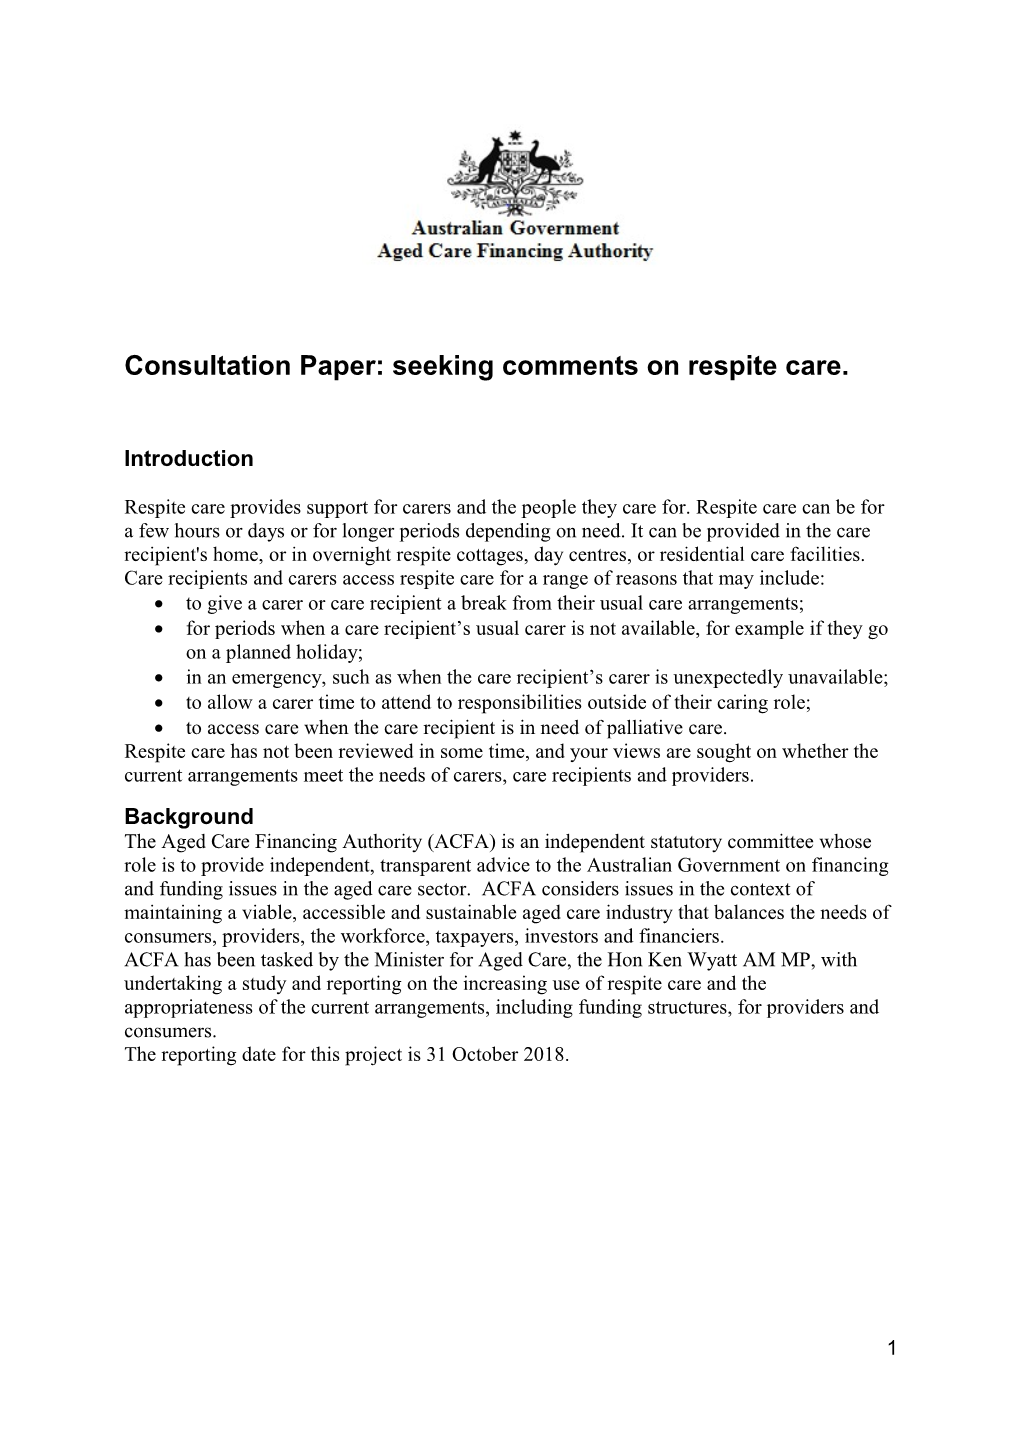 Consultation Paper: Seeking Comments on Respite Care